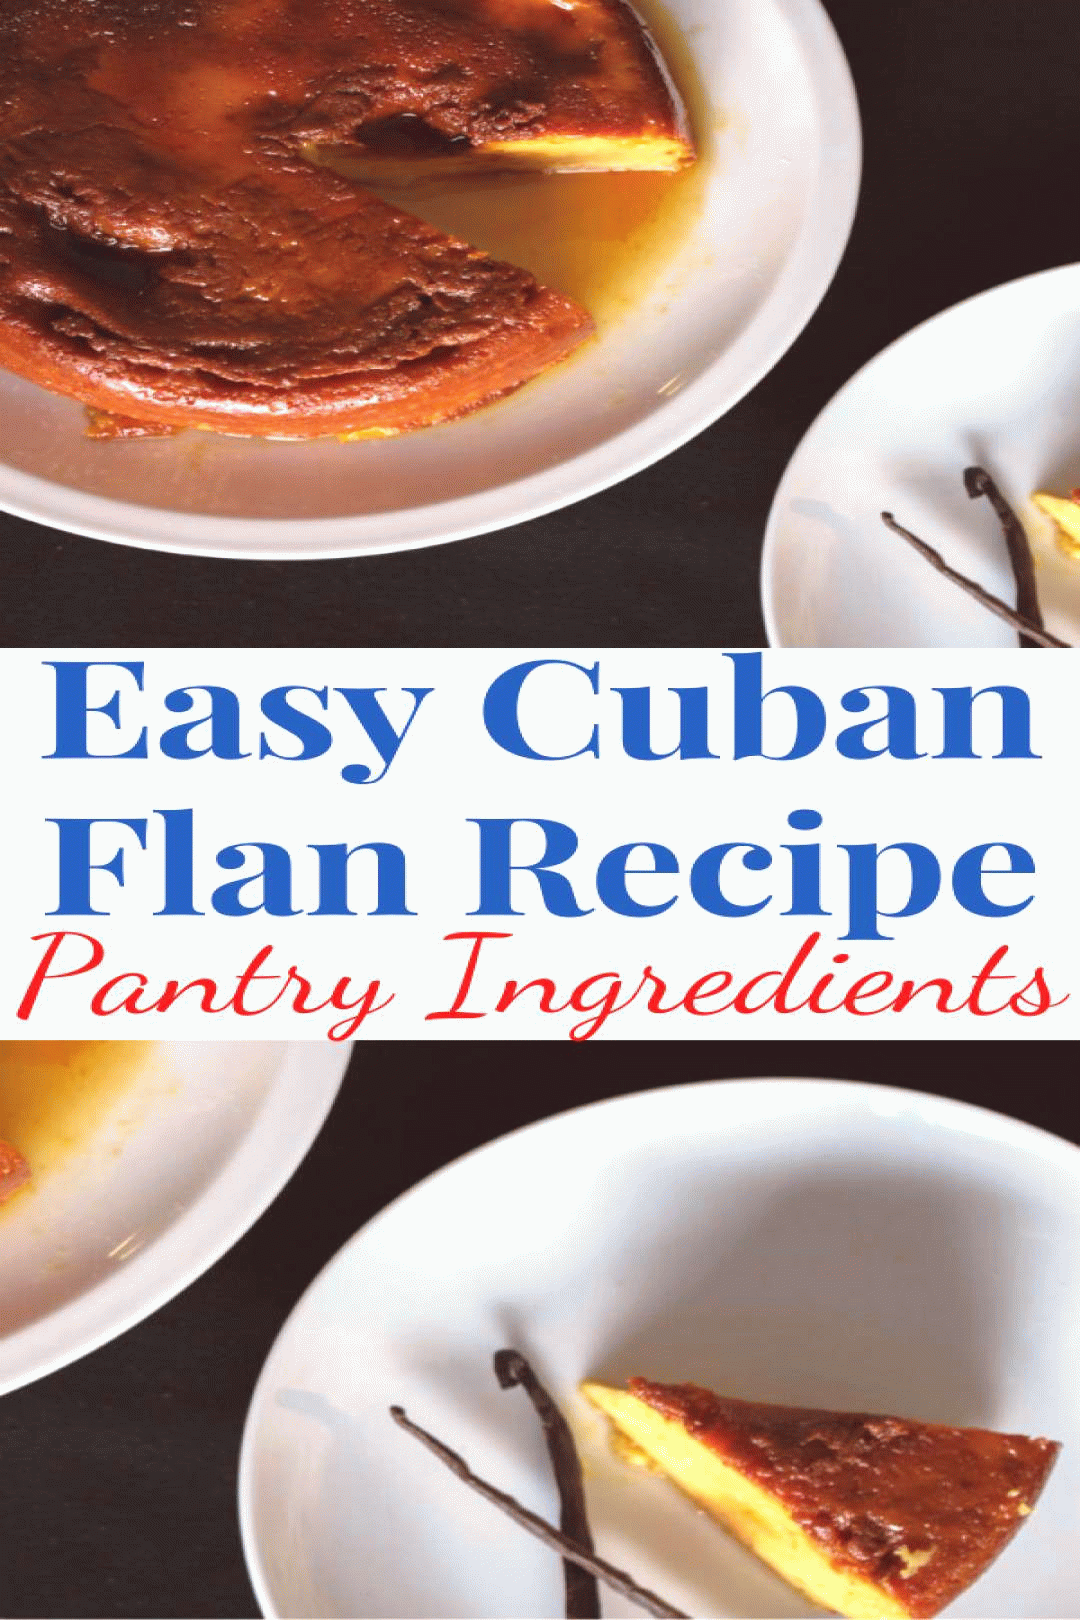 cuban flan recipe authentic try the delicious sweetness of caramel coating on side in 2020 gif medium